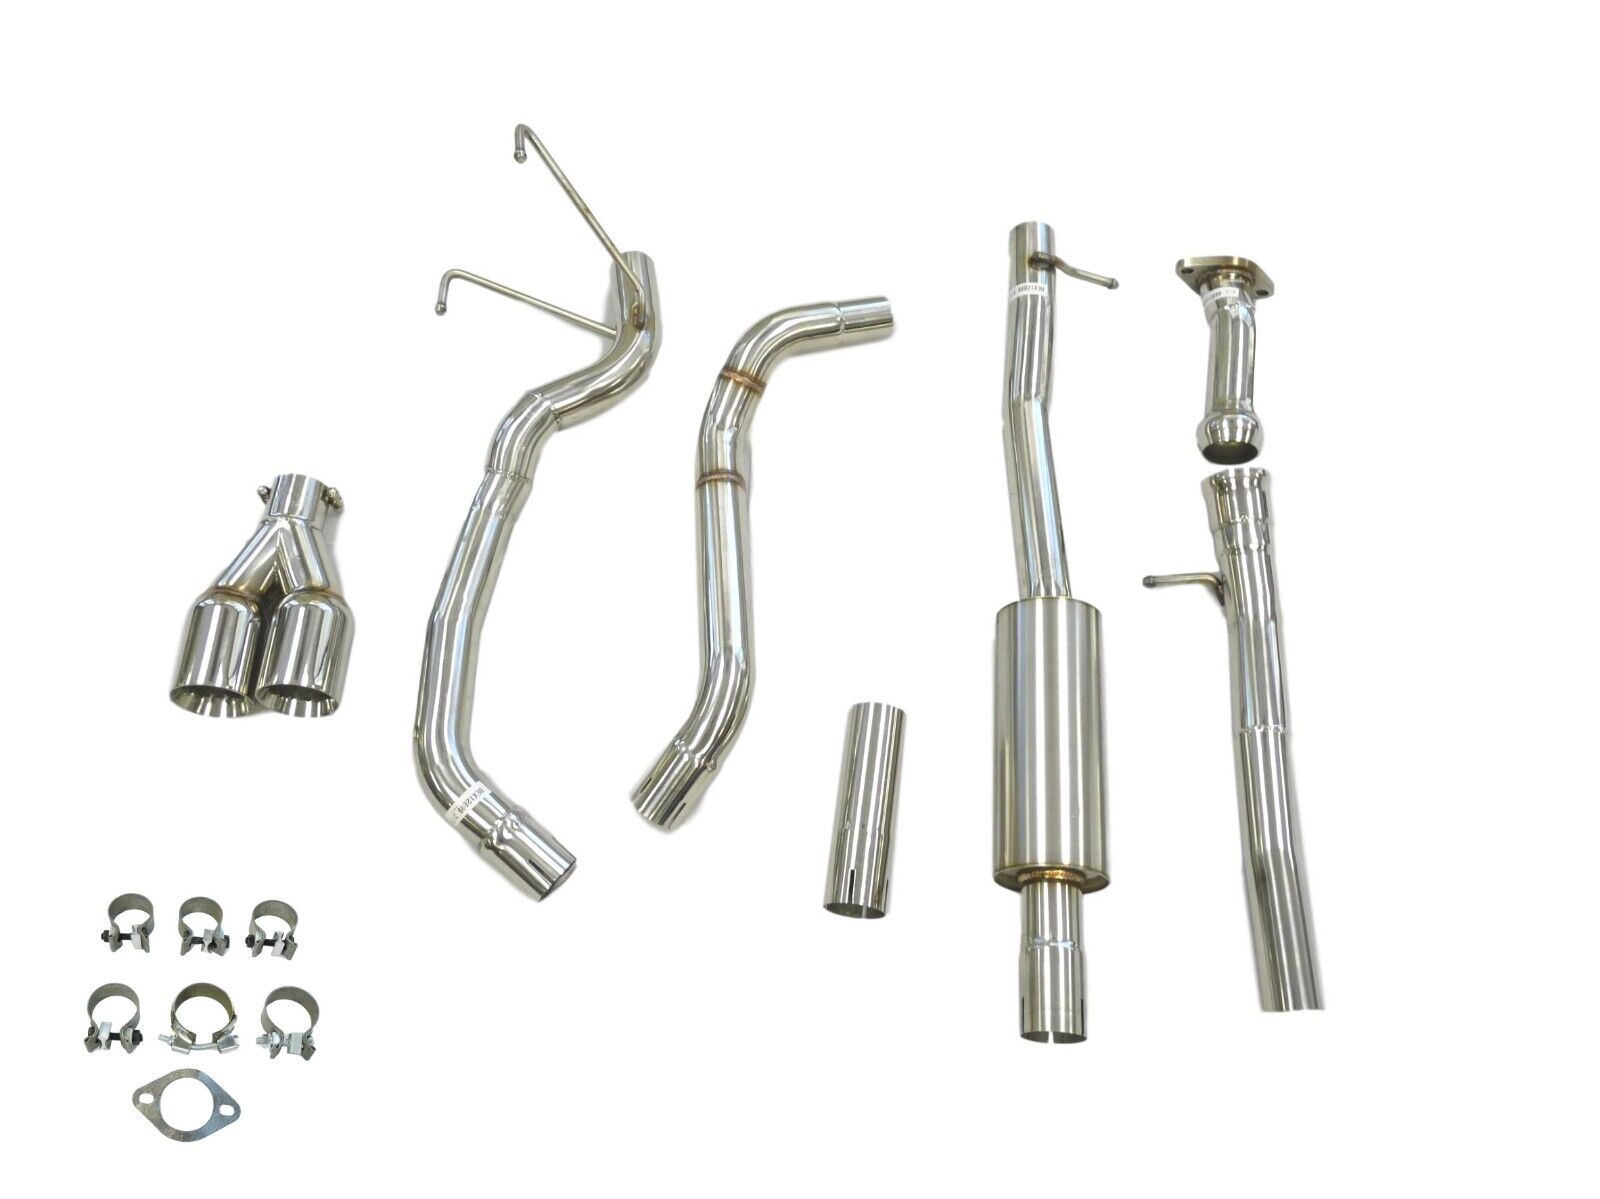 Becker Stainless Steel Catback Exhaust System Fits For 2012+ Fiat 500 1.4L  